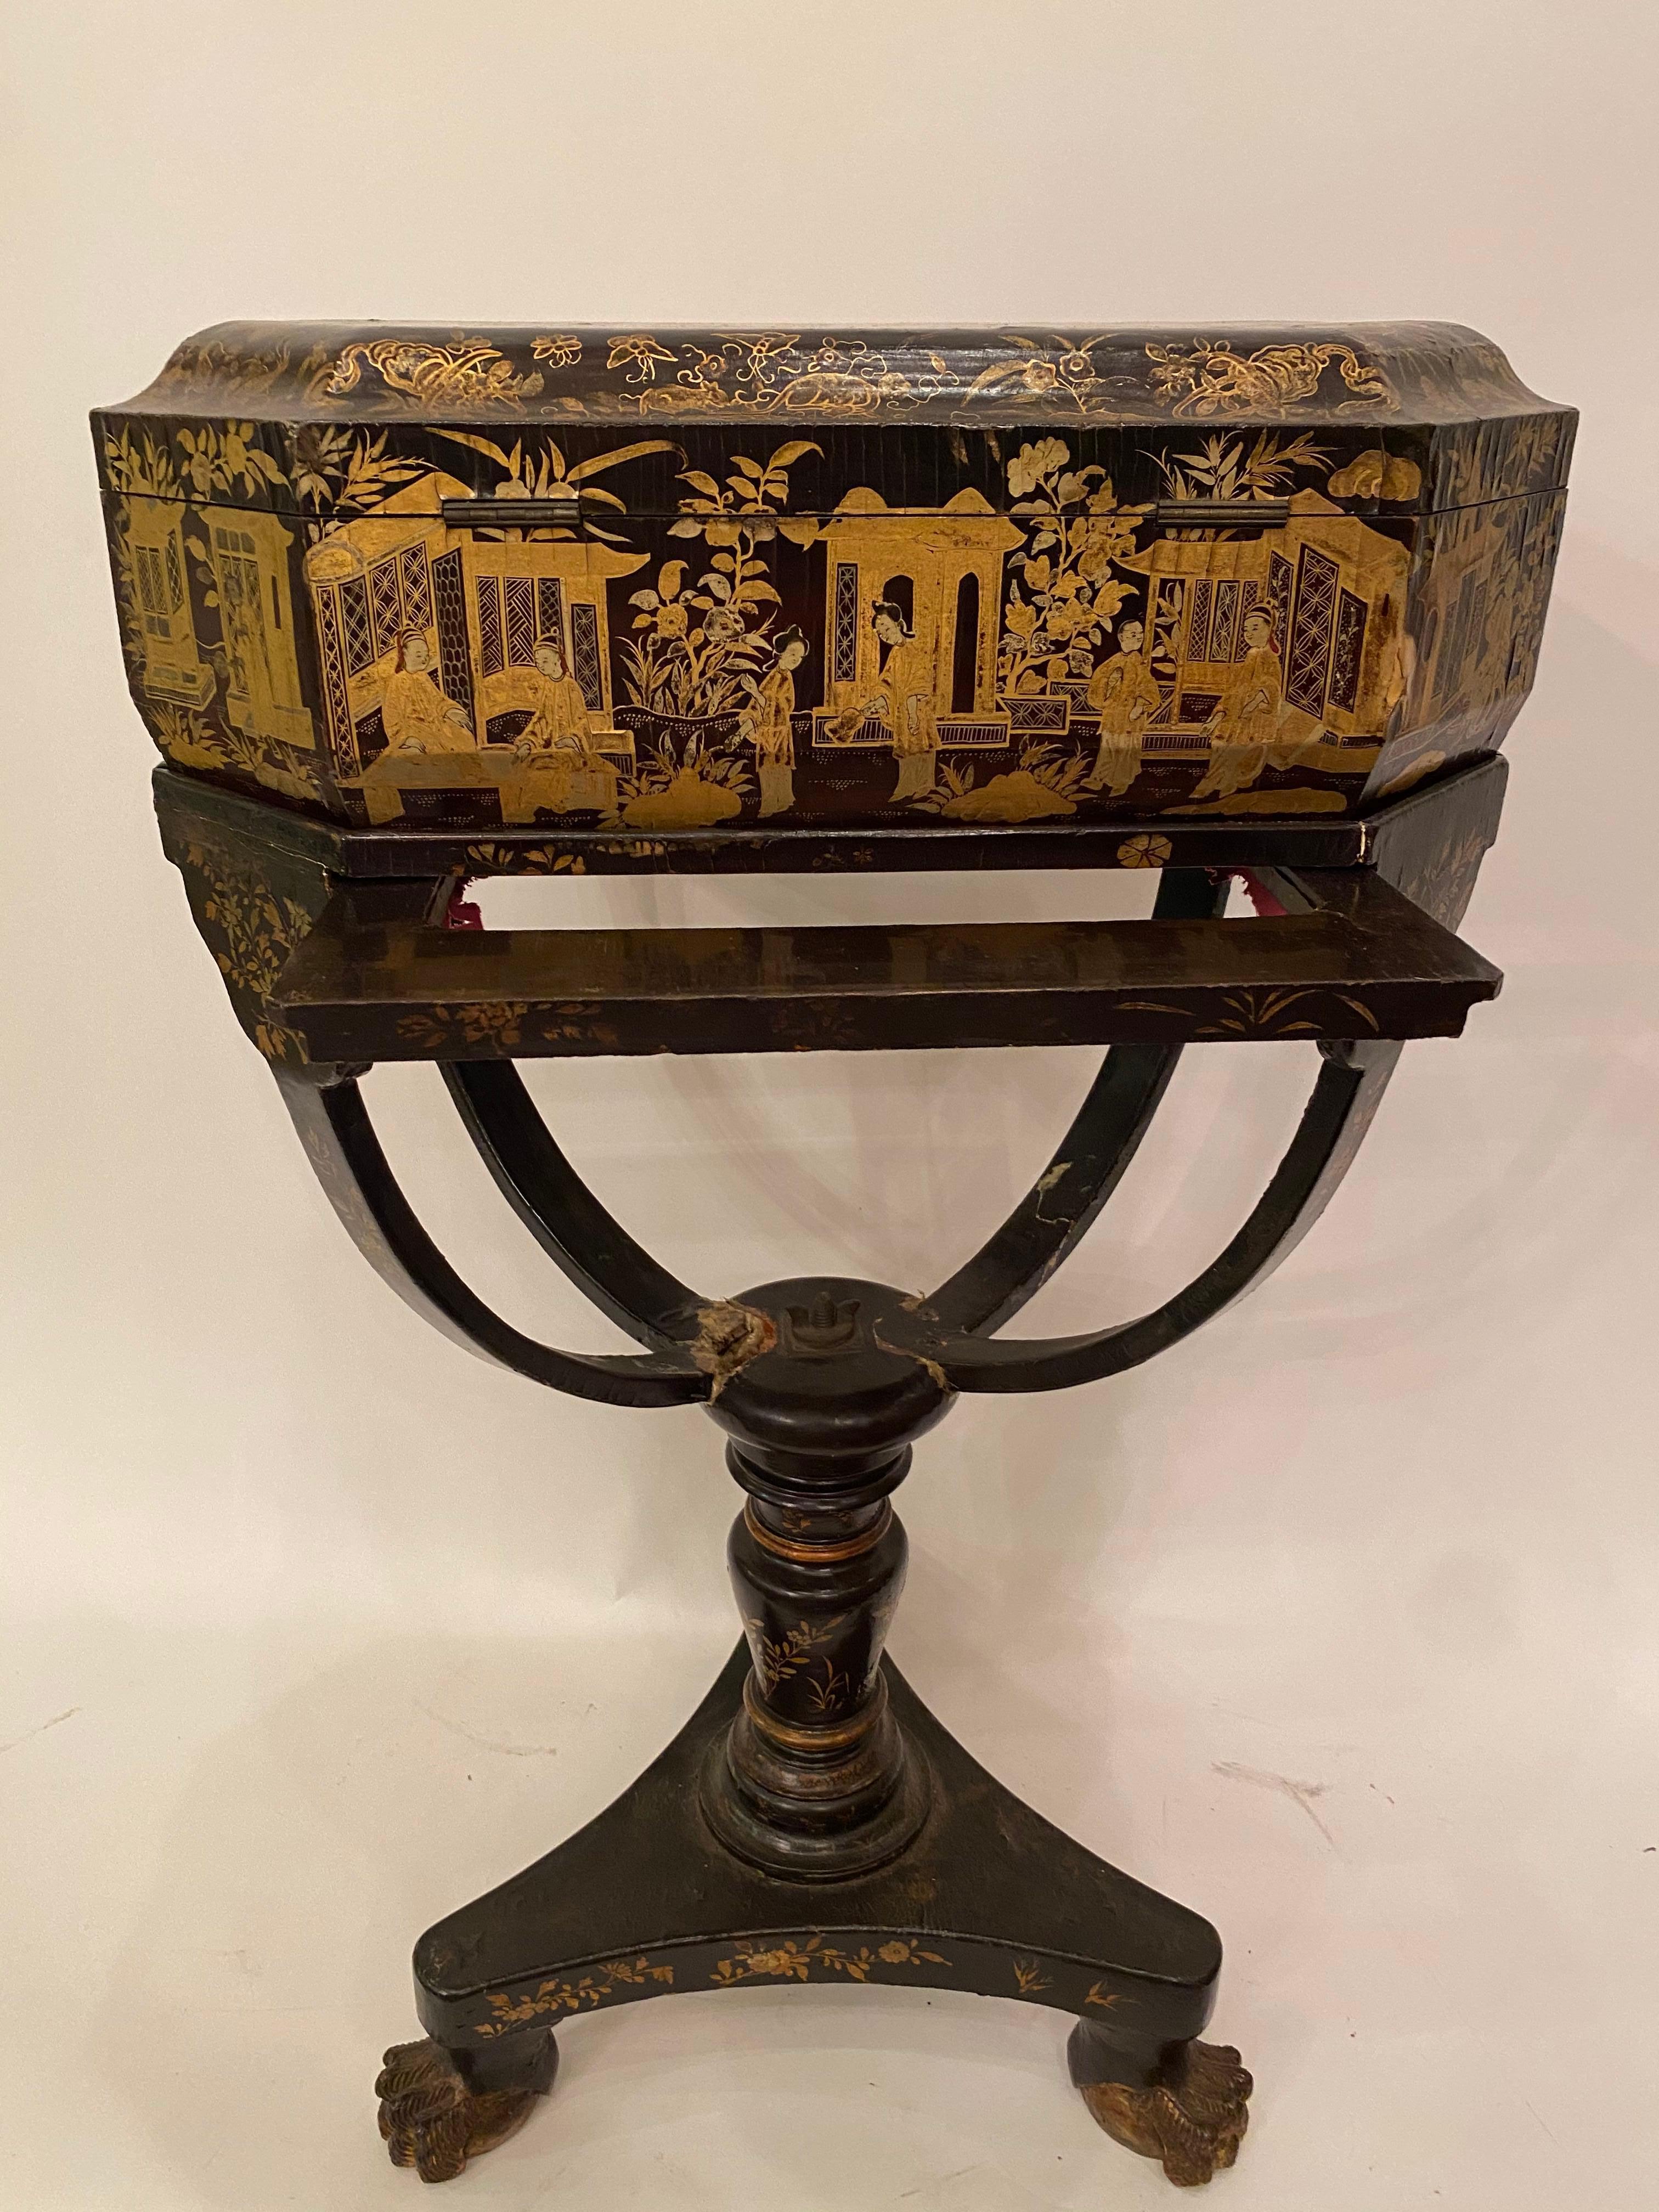 Antique 19th century Chinese lacquer sewing table with hand painted scenes and beautiful legs. Gilt export black lacquer all-over the table. The sewing box can be take off. It is on the original stand. Somewhere maybe broke but it be fixed, please